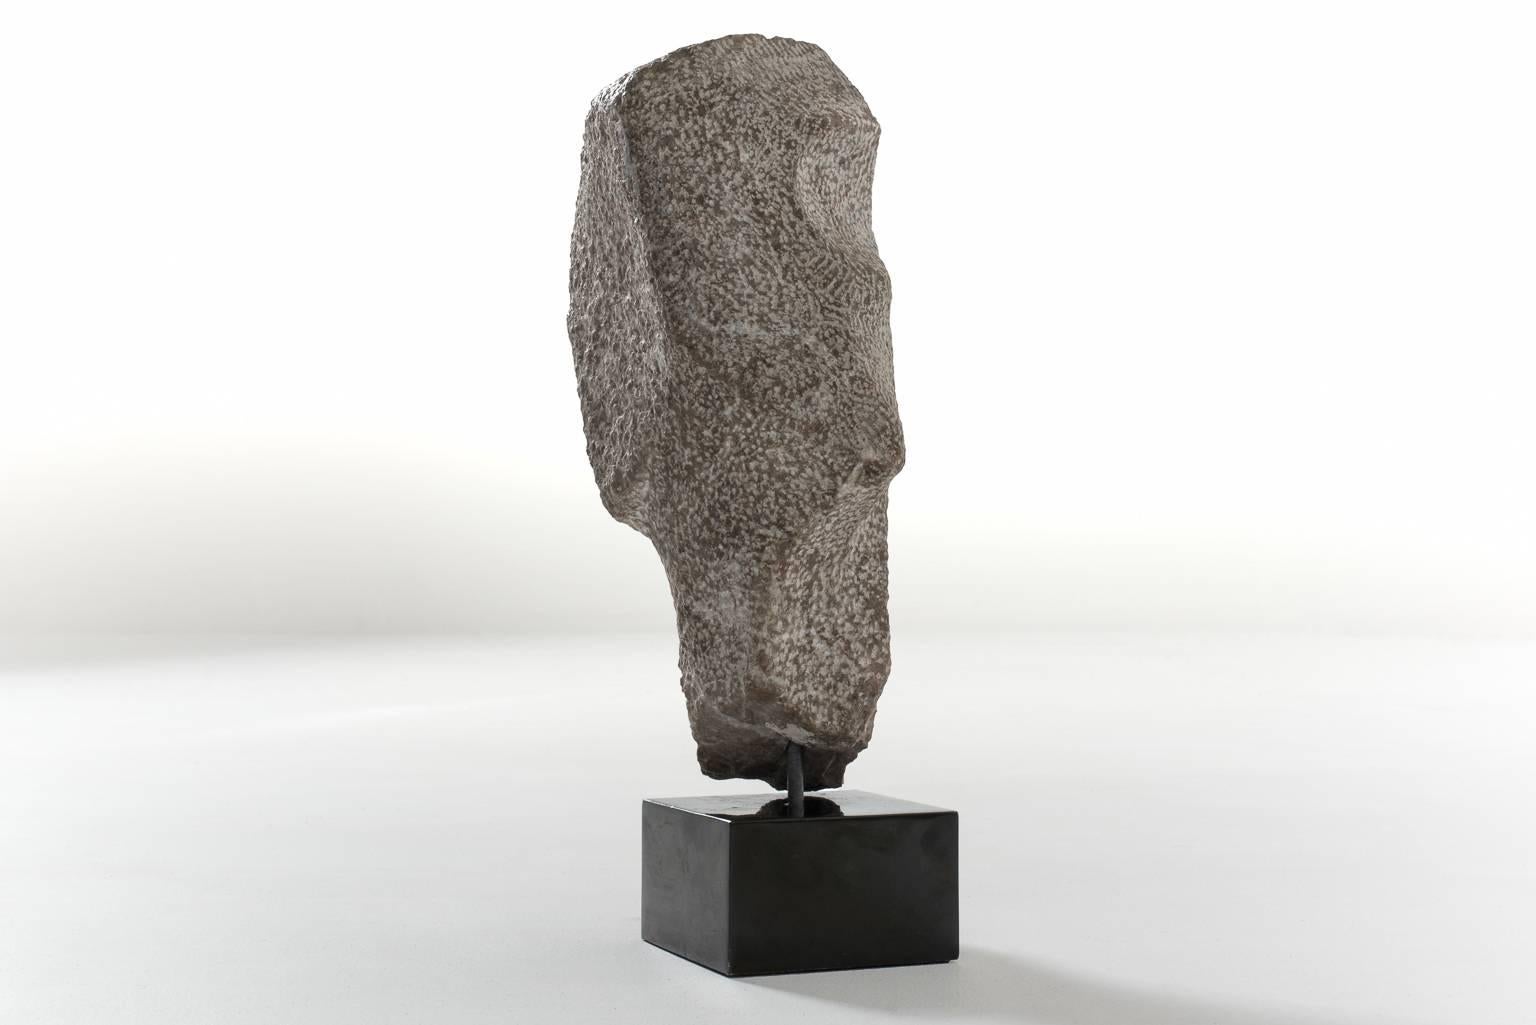 Brutalist Abstract ‘Head’ Sculpture in Natural Stone